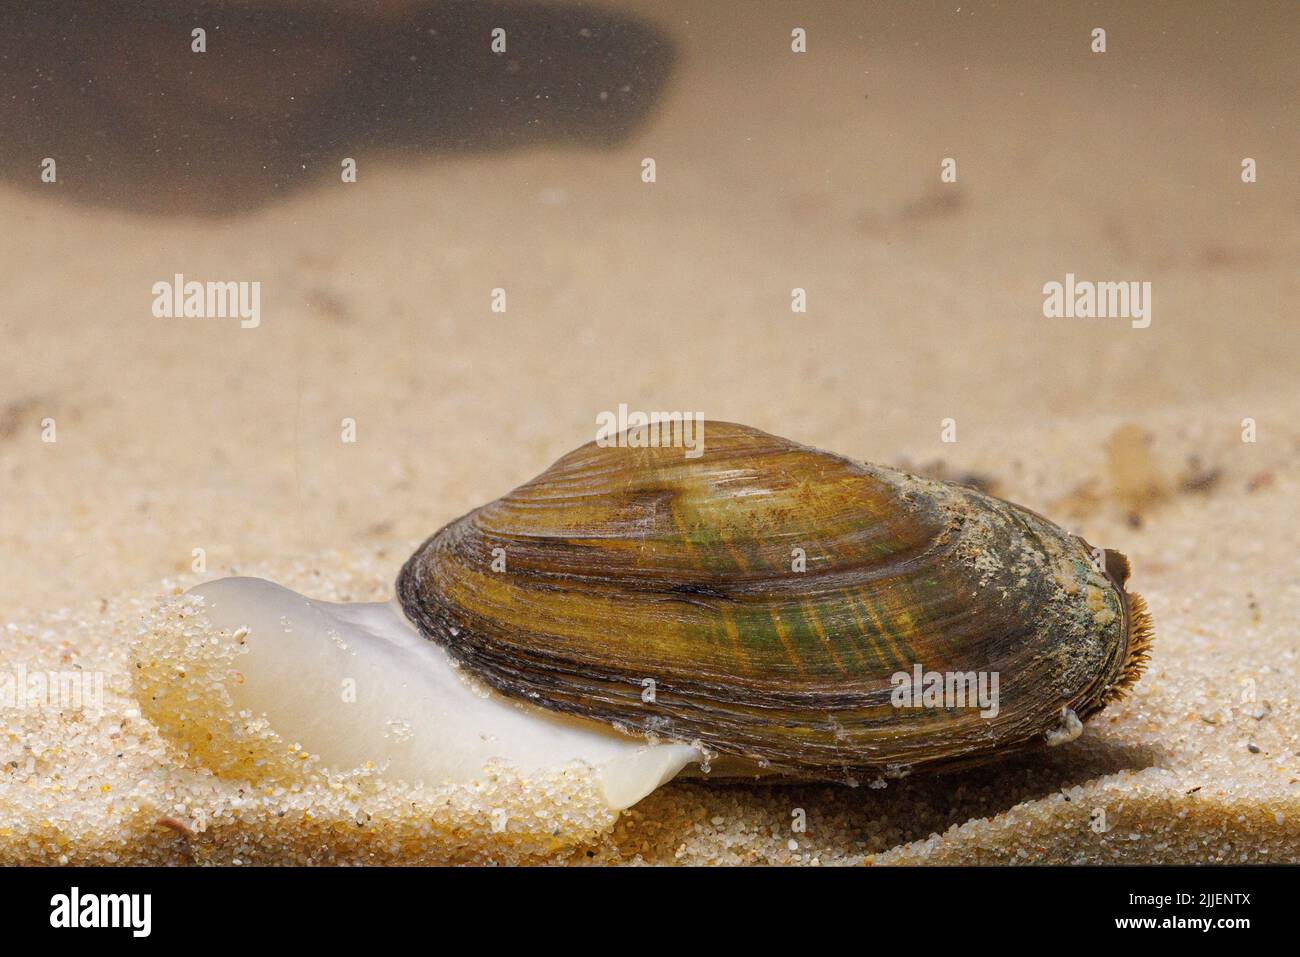 Common river mussel, Common Central European river mussel (Unio crassus), creeps over sandy bottom with visible foot, Germany Stock Photo